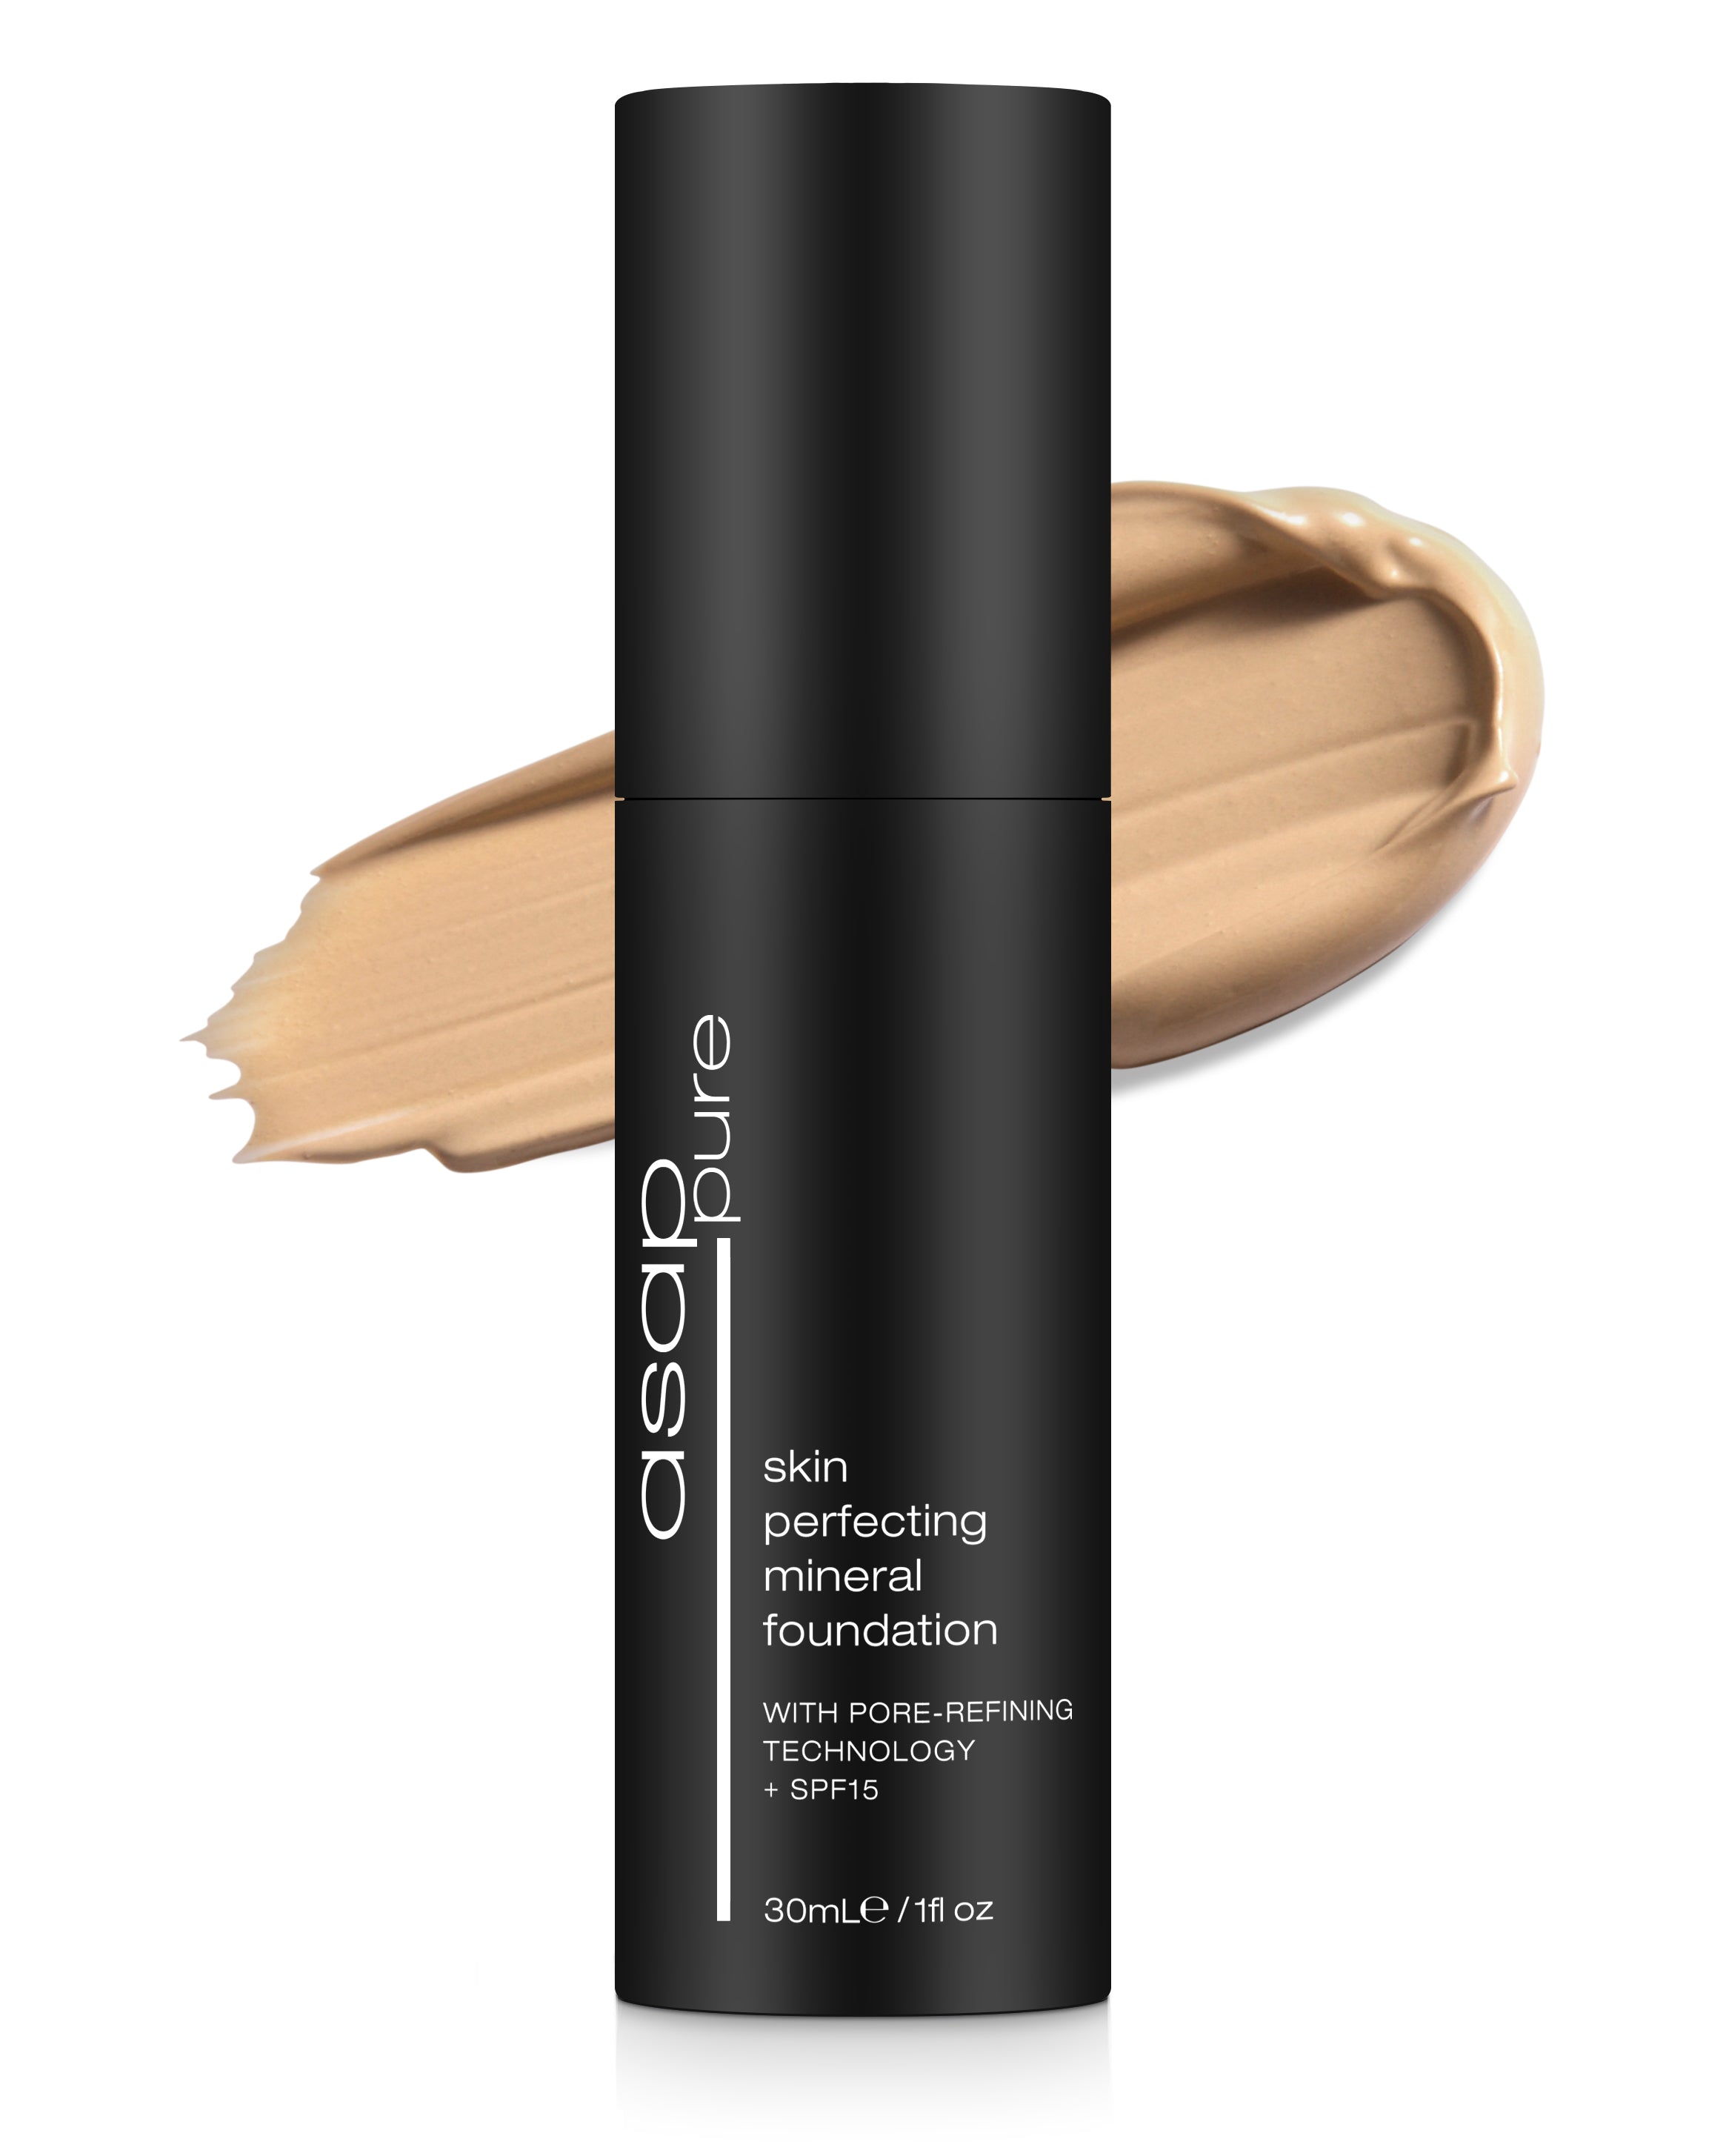 Skin Perfecting Mineral Foundation